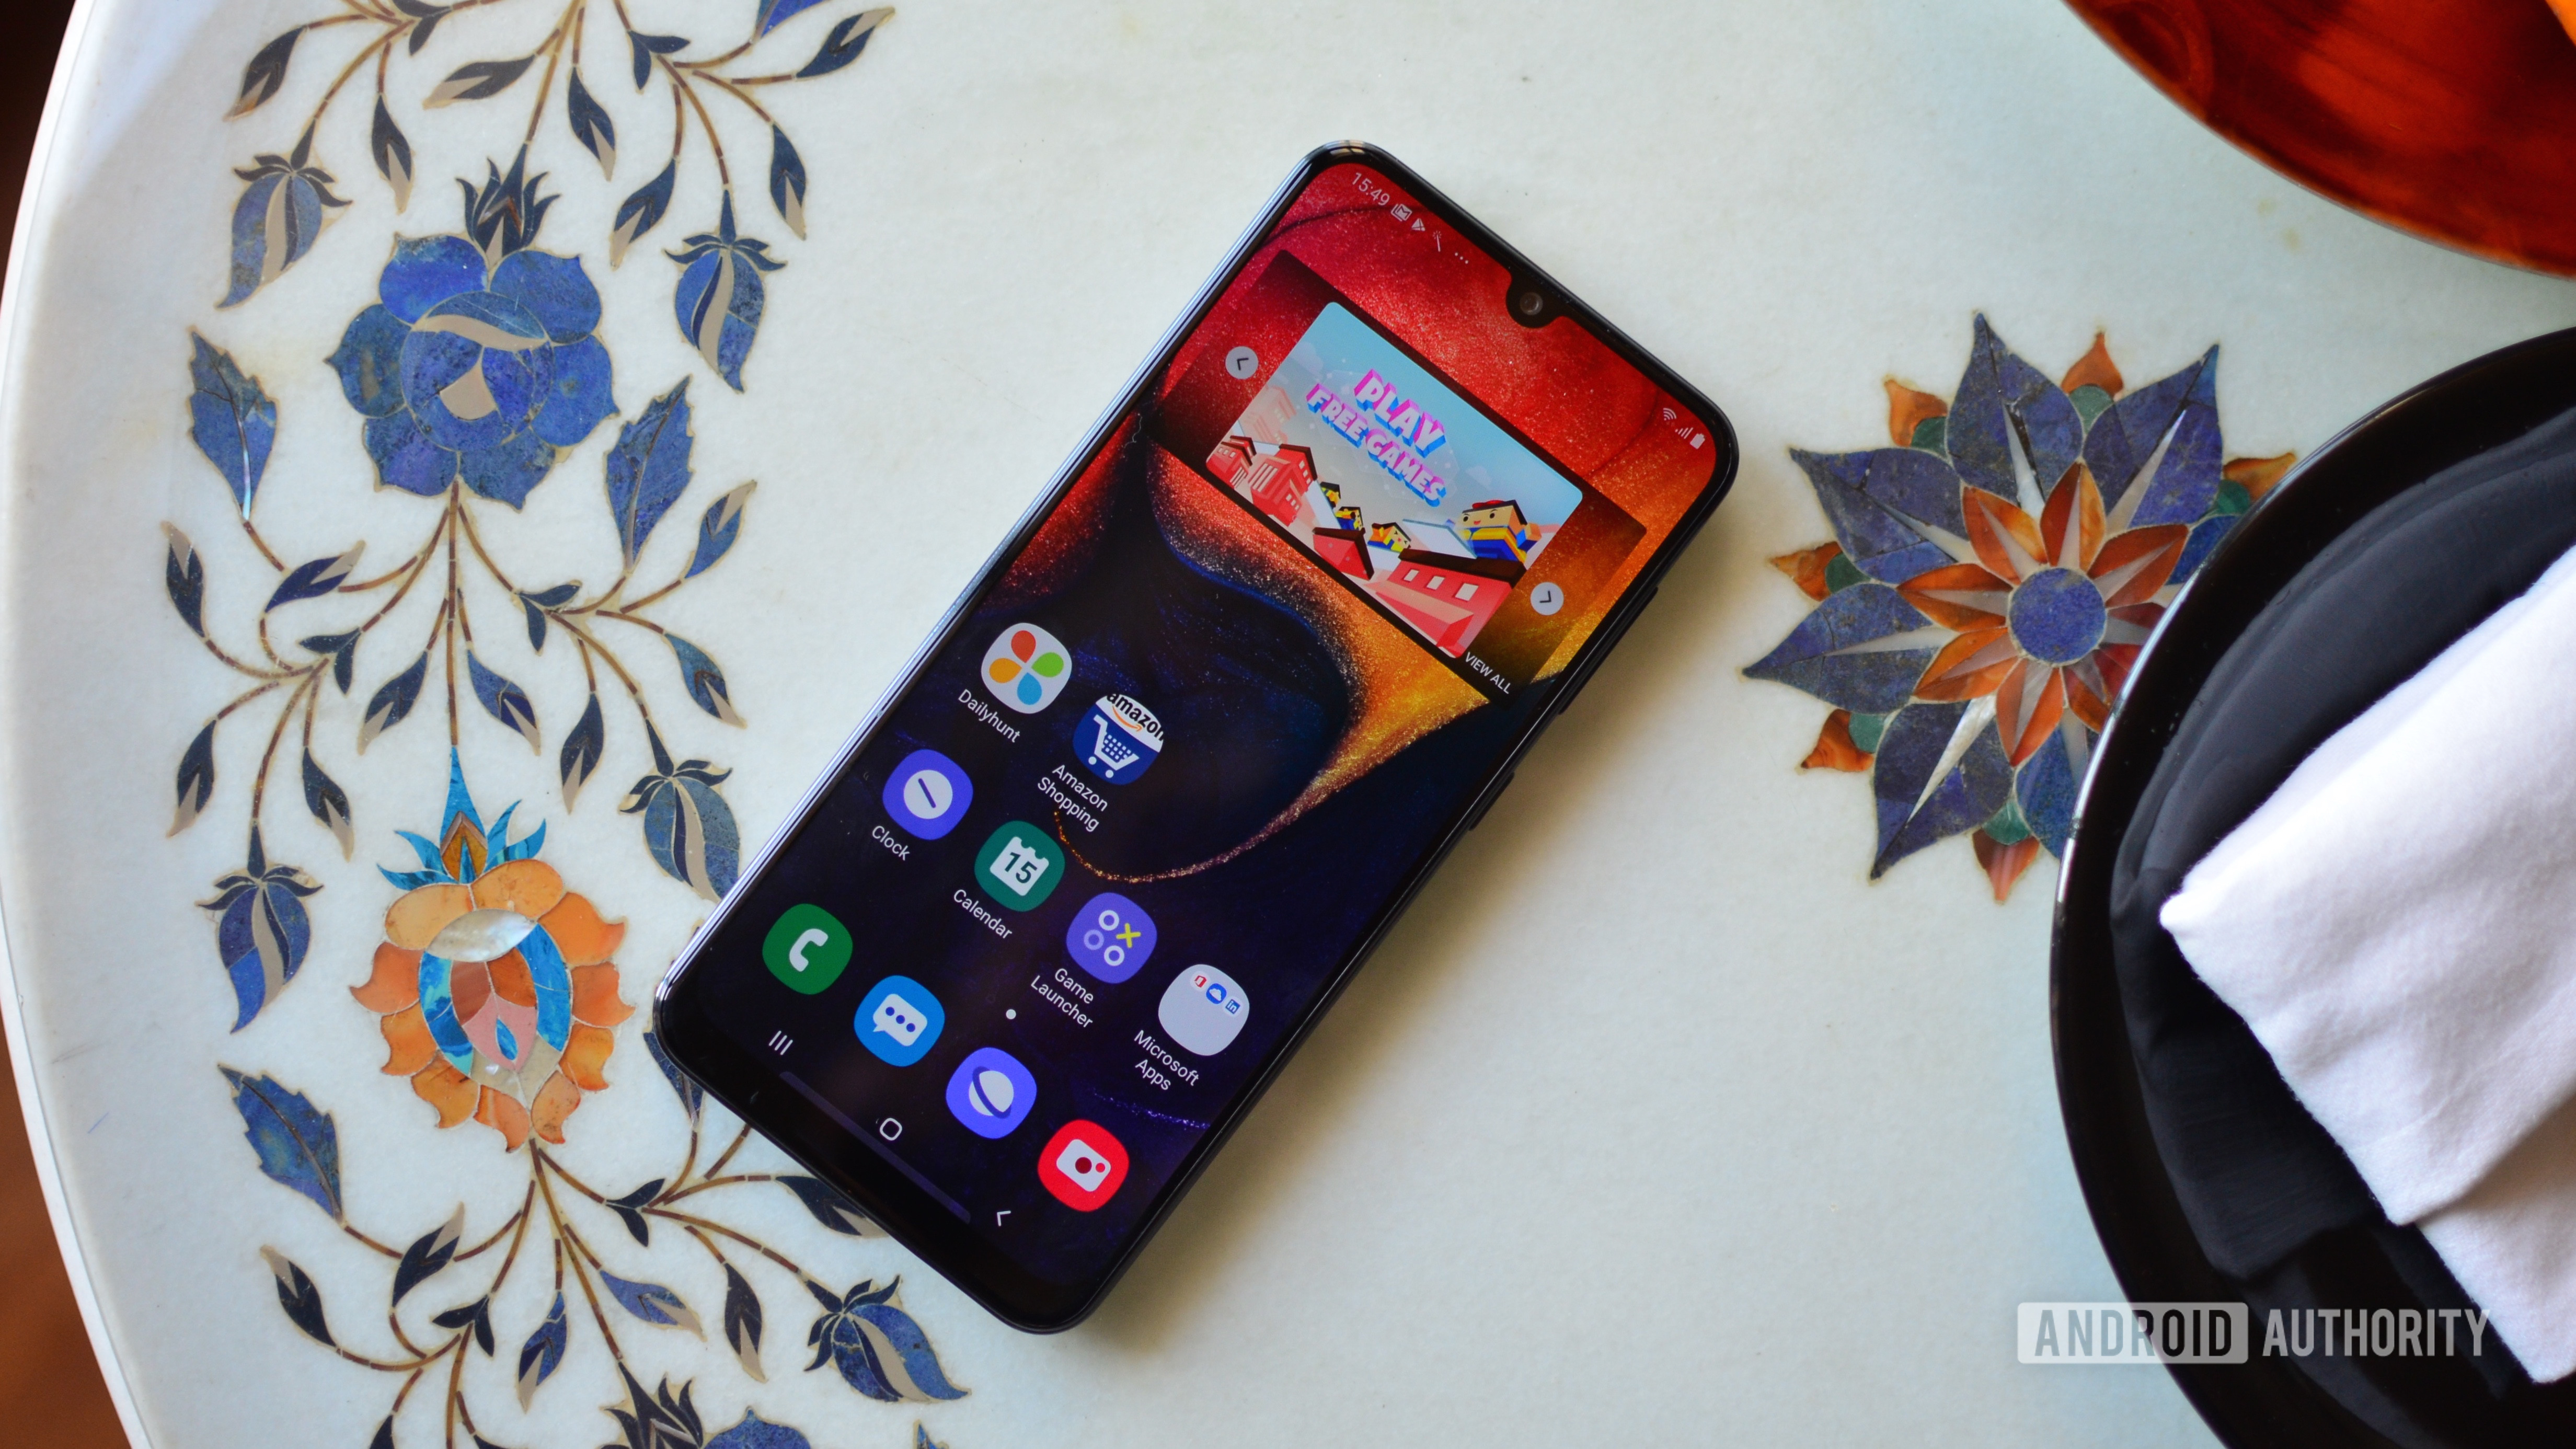 The Samsung Galaxy A50 was one of the most popular smartphones of 2019.